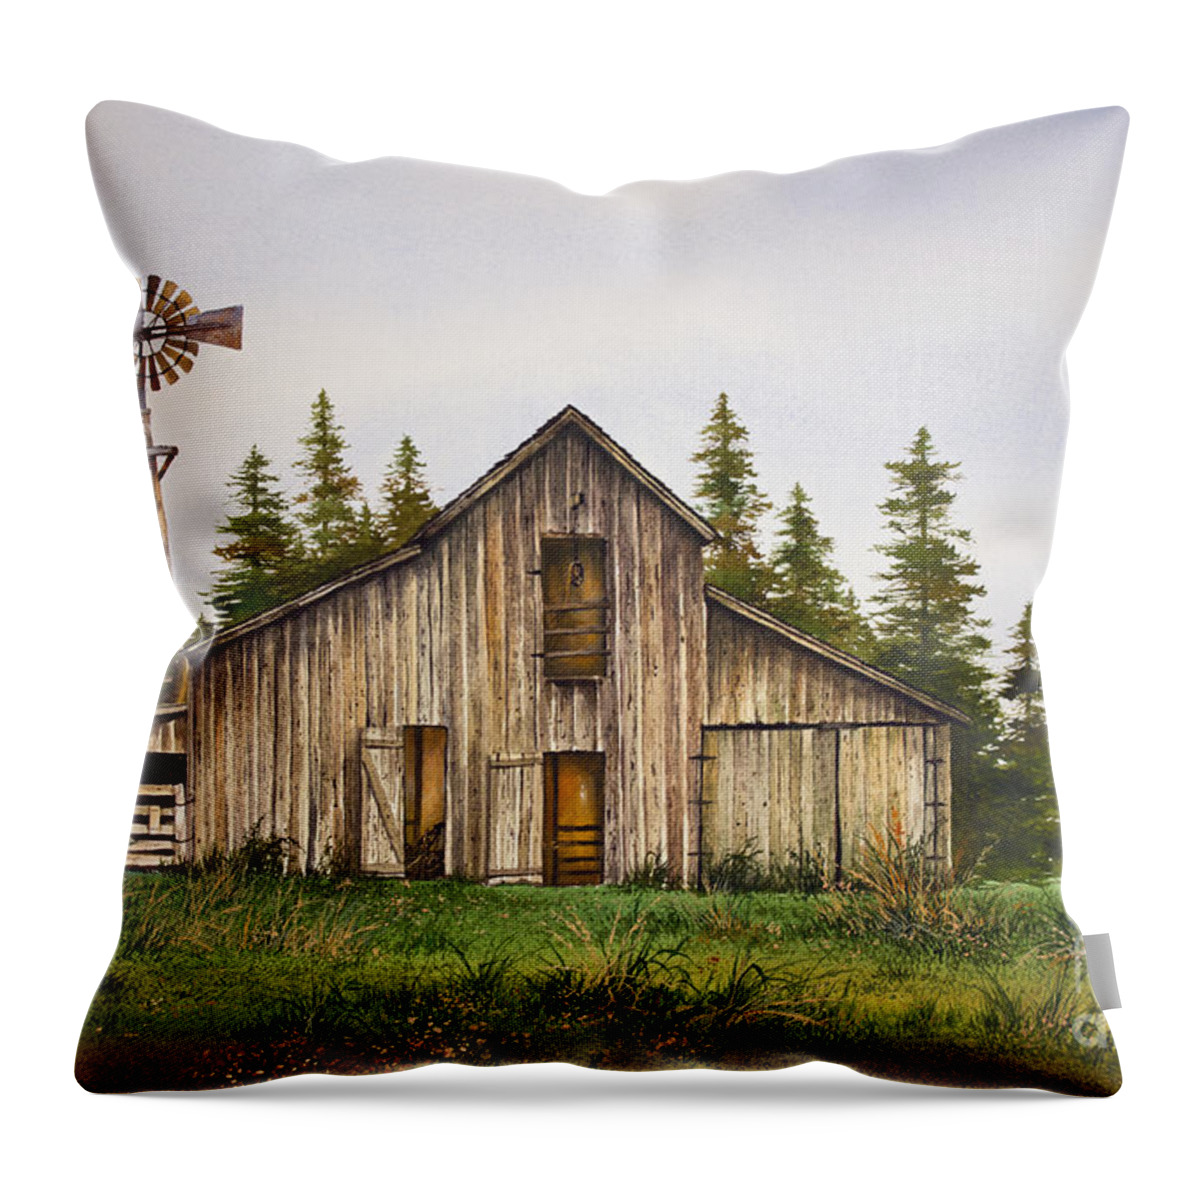 Rustic Barn Throw Pillow featuring the painting Rustic Barn by James Williamson